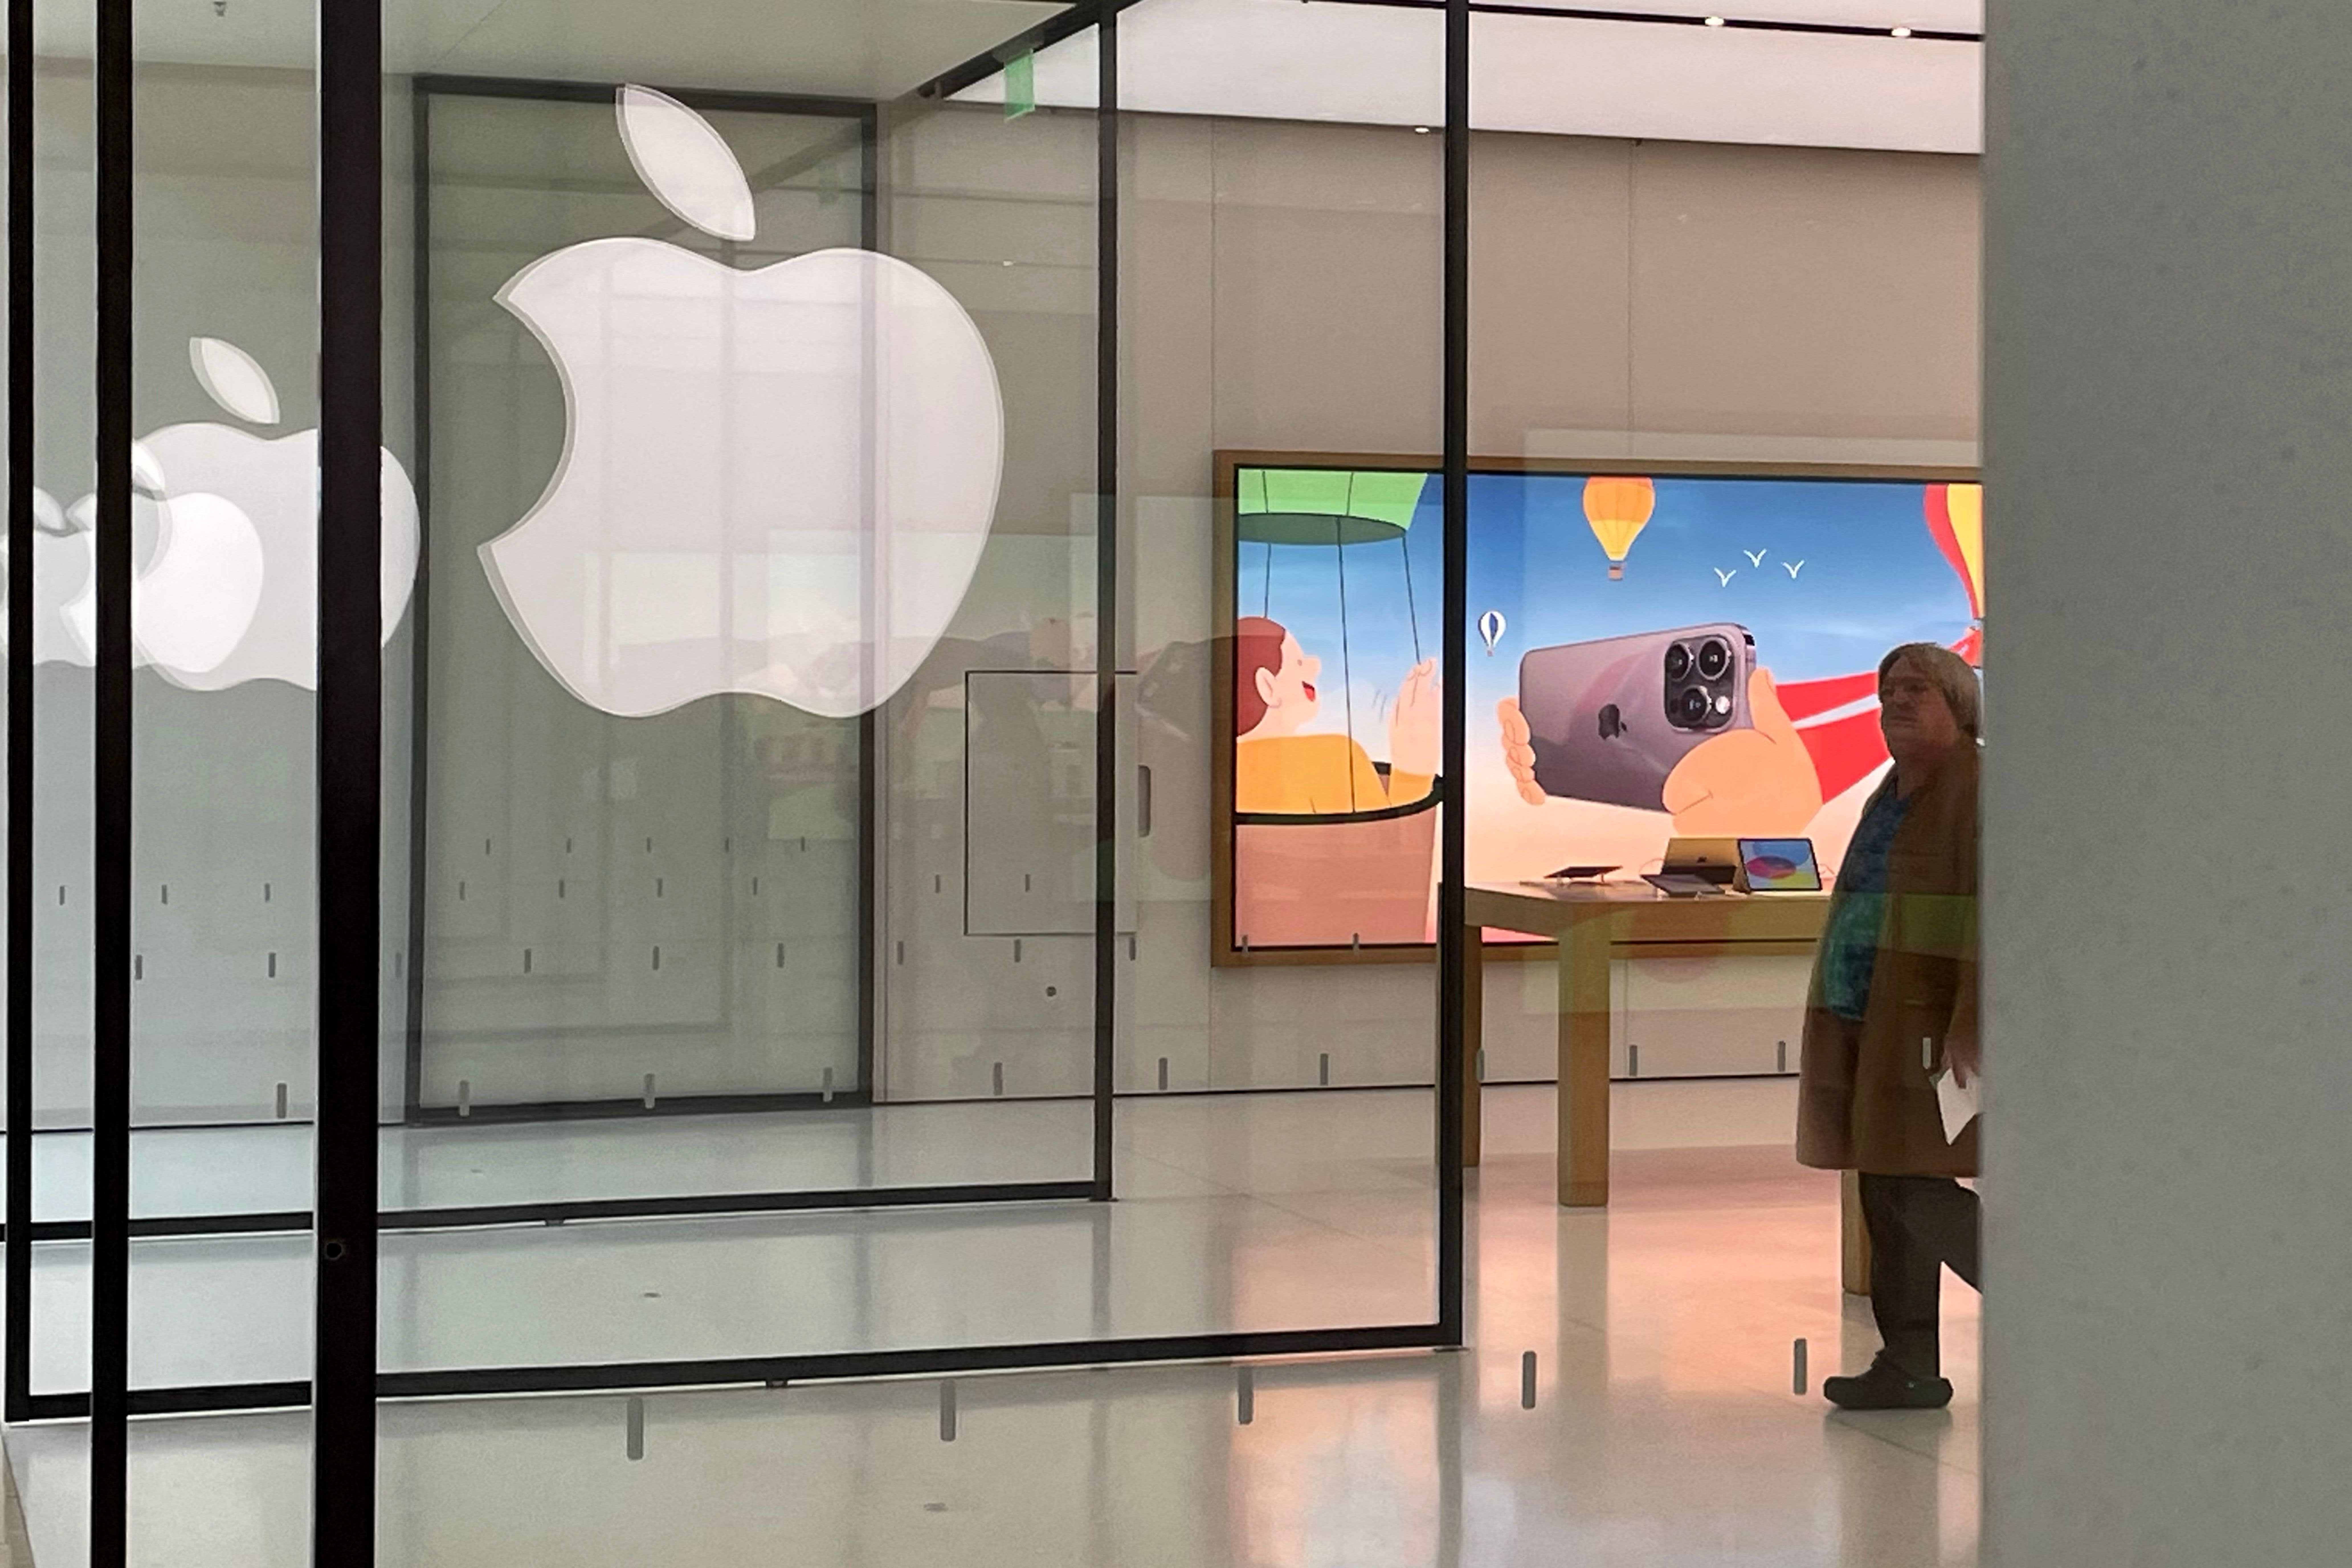 Morgan Stanley sees Apple up more than 20%, says investors should watch for near-term headwinds